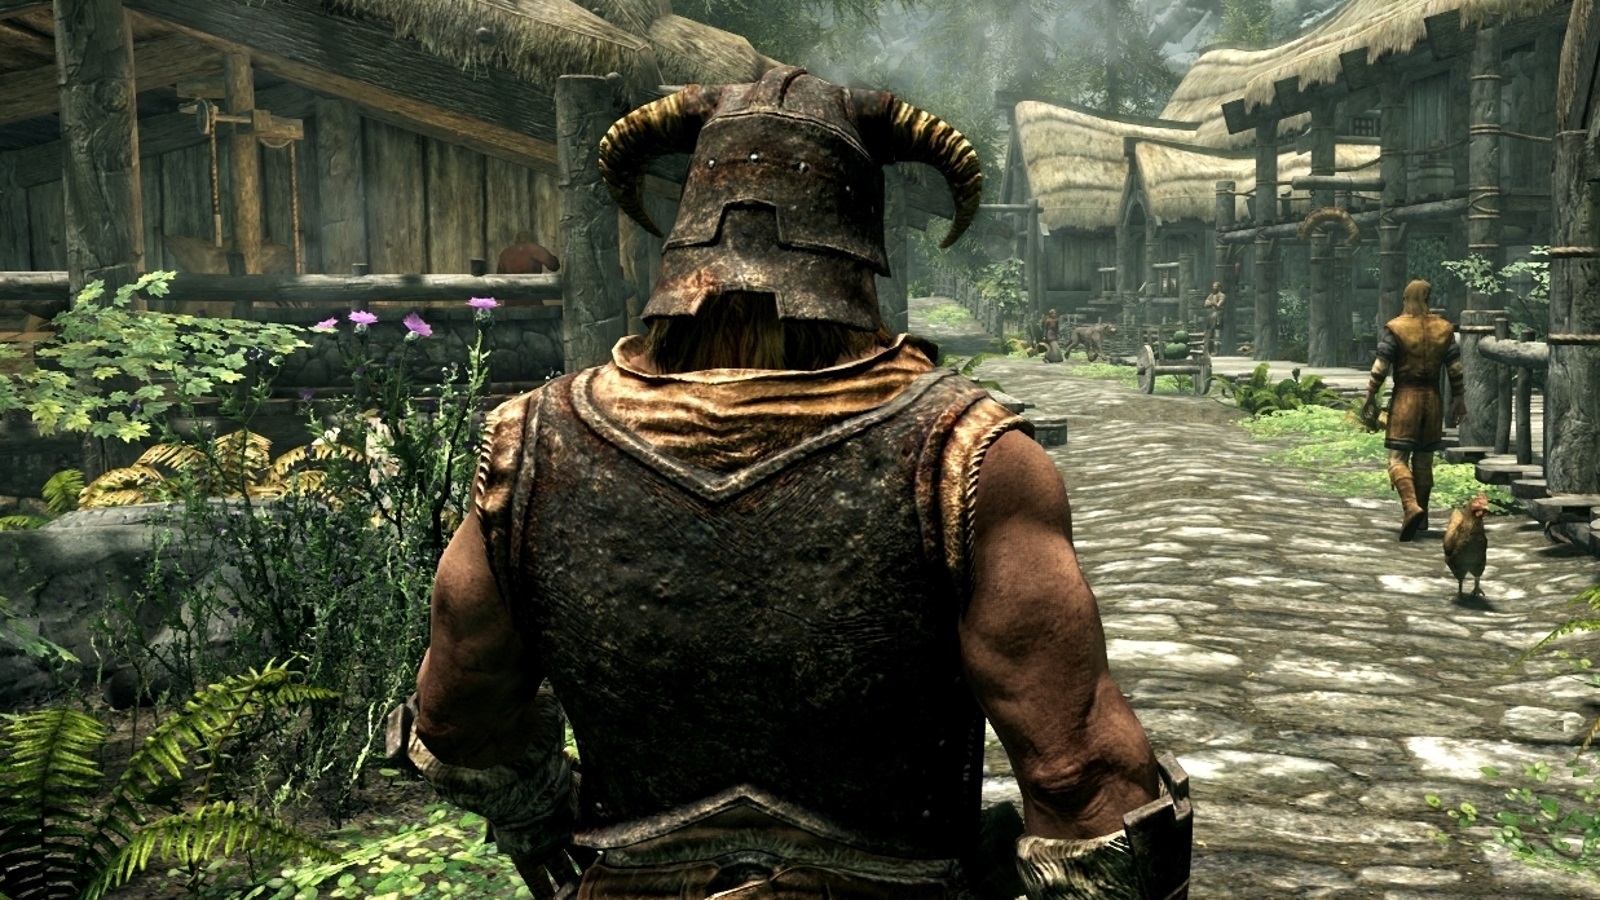 playstation-5-can-now-play-skyrim-at-60fps-thanks-to-new-mod-1611006837367.jpg